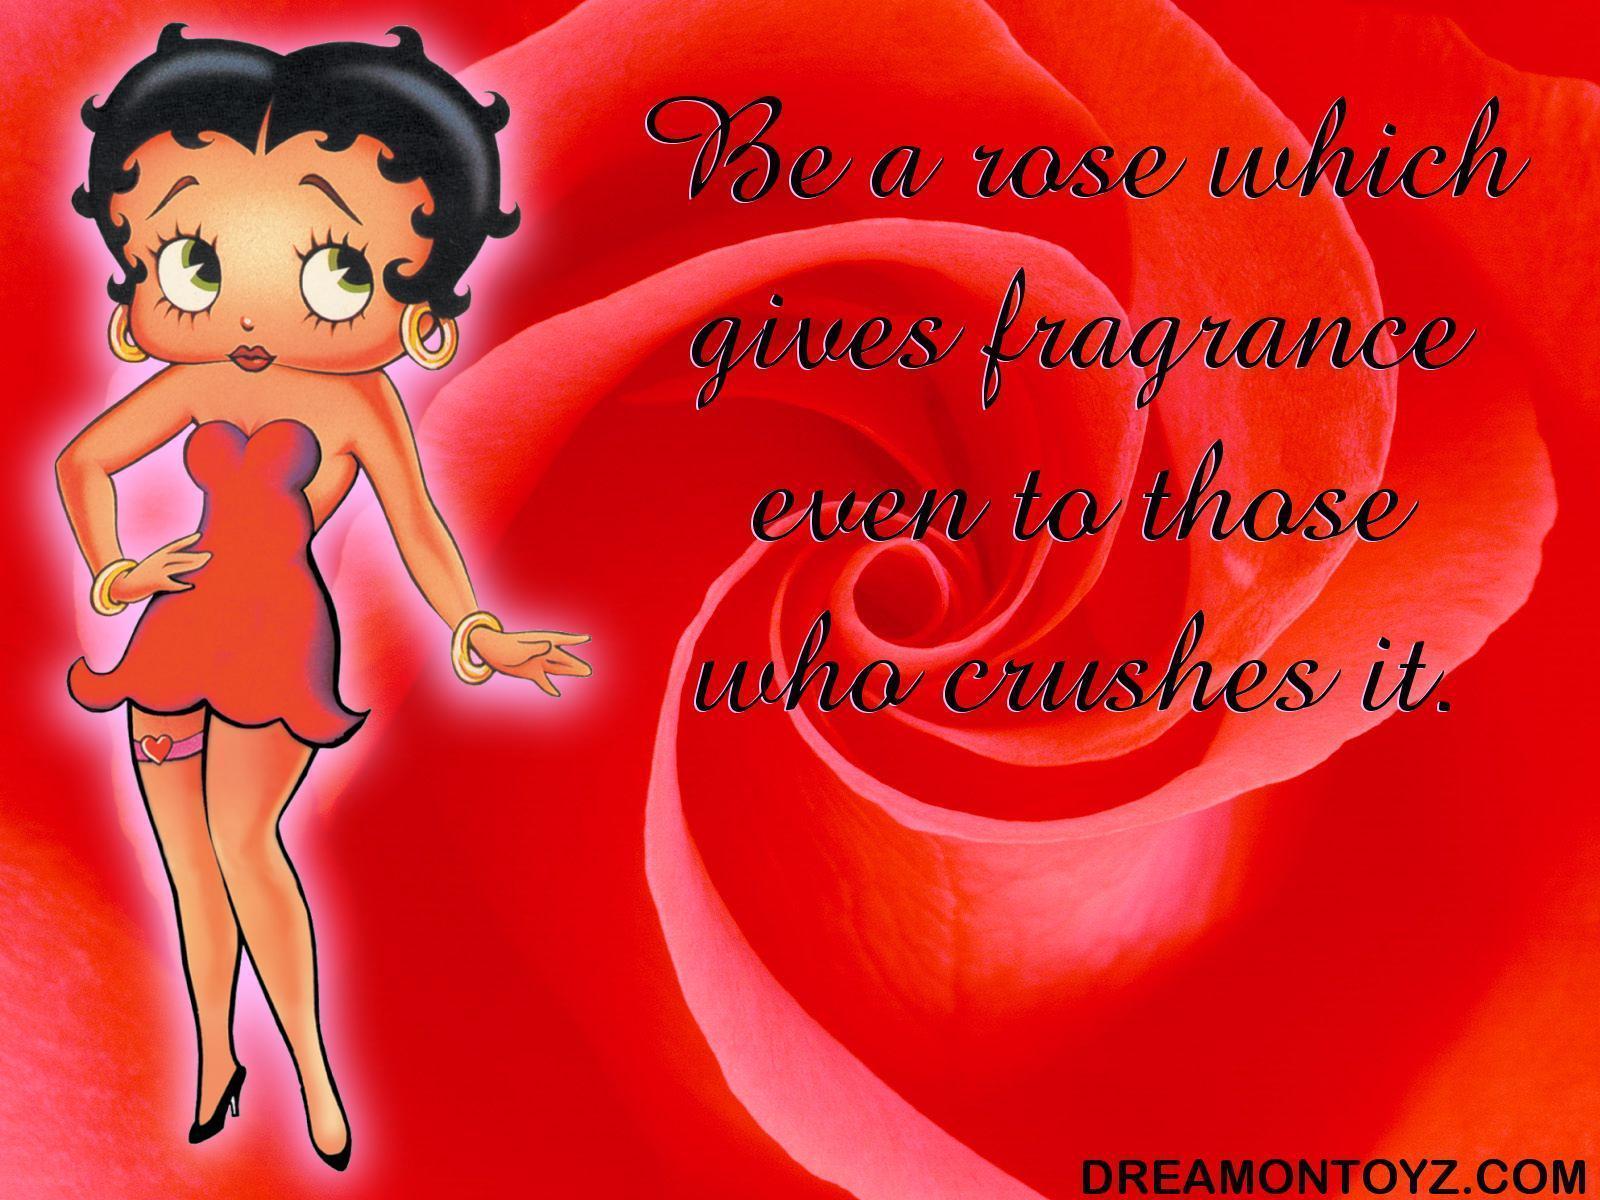 black betty boop pictures images